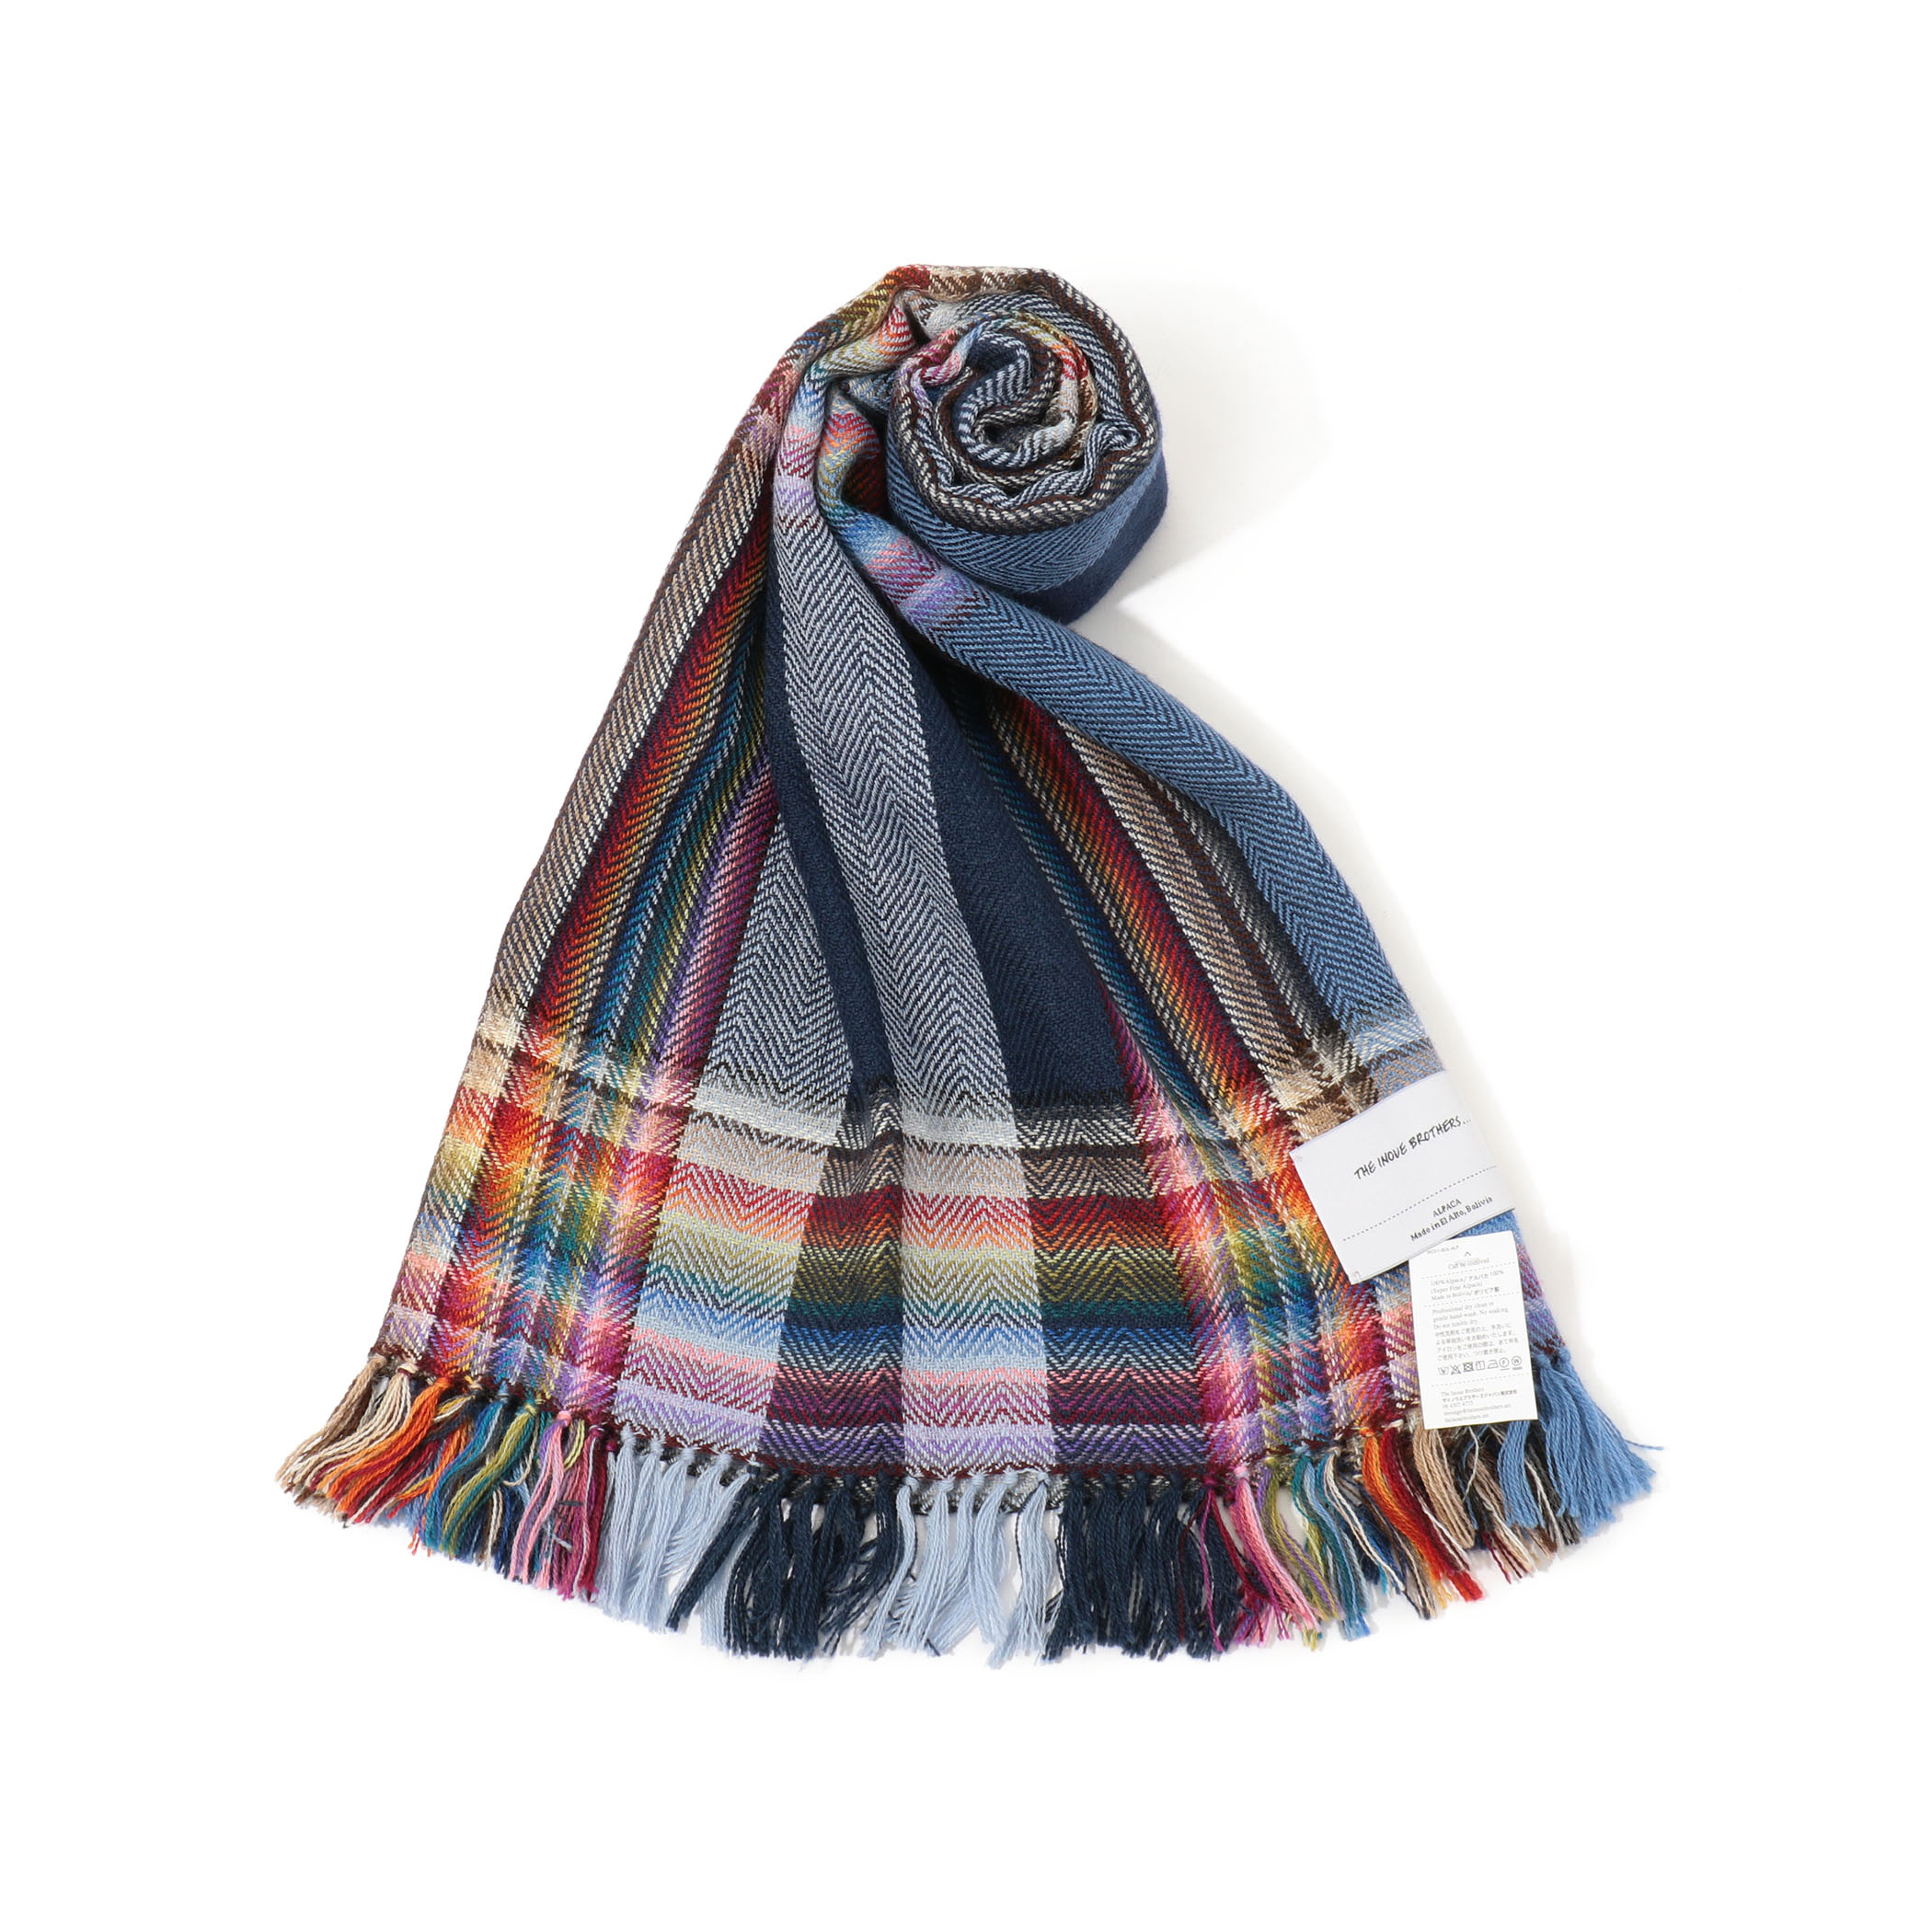 THE INOUE BROTHERS Multi Coloured Scarf アルパカ ストール